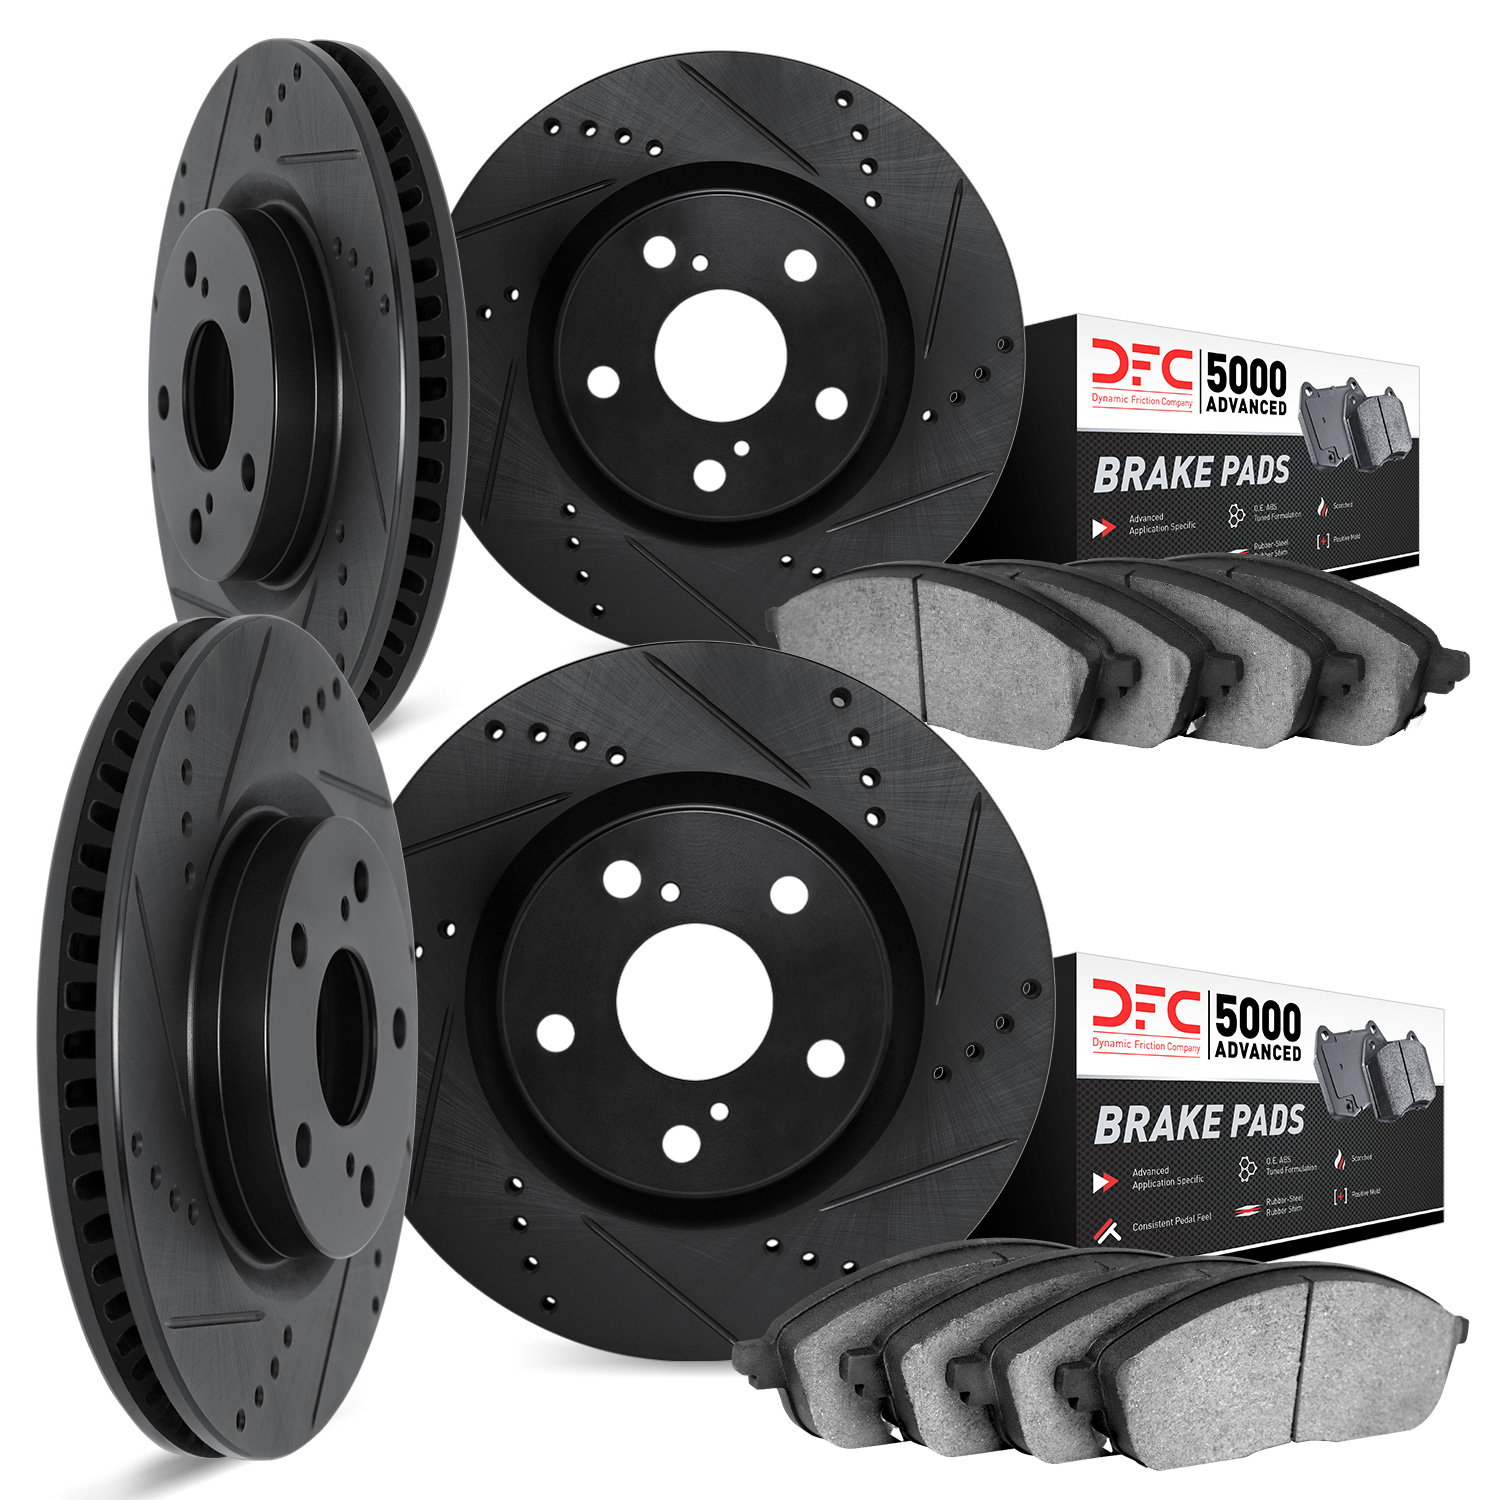 8504-13008 Drilled/Slotted Brake Rotors w/5000 Advanced Brake Pads Kit [Black], 2005-2007 Subaru, Position: Front and Rear